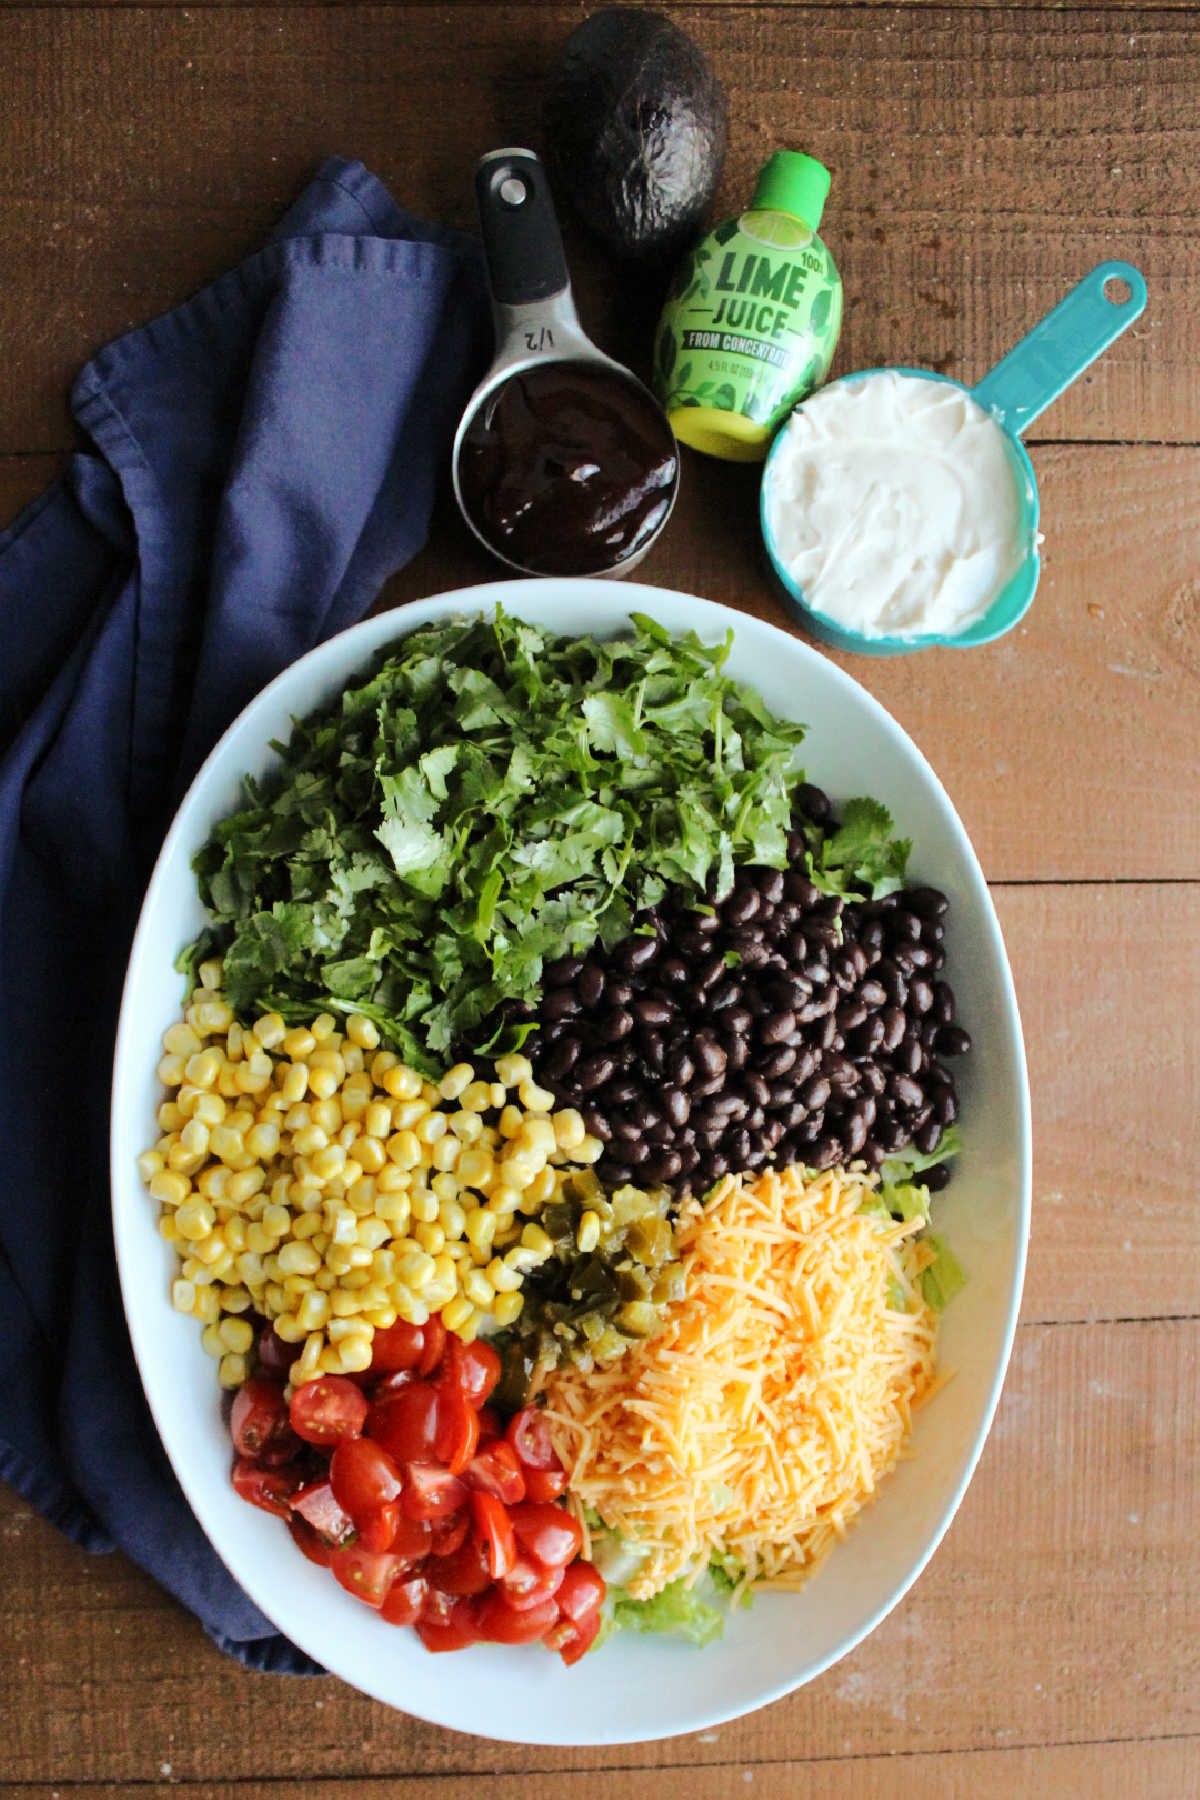 Large bowl of lettuce topped with various toppings including corn, beans, cheese, and tomatoes with the dressing ingredients in the background.